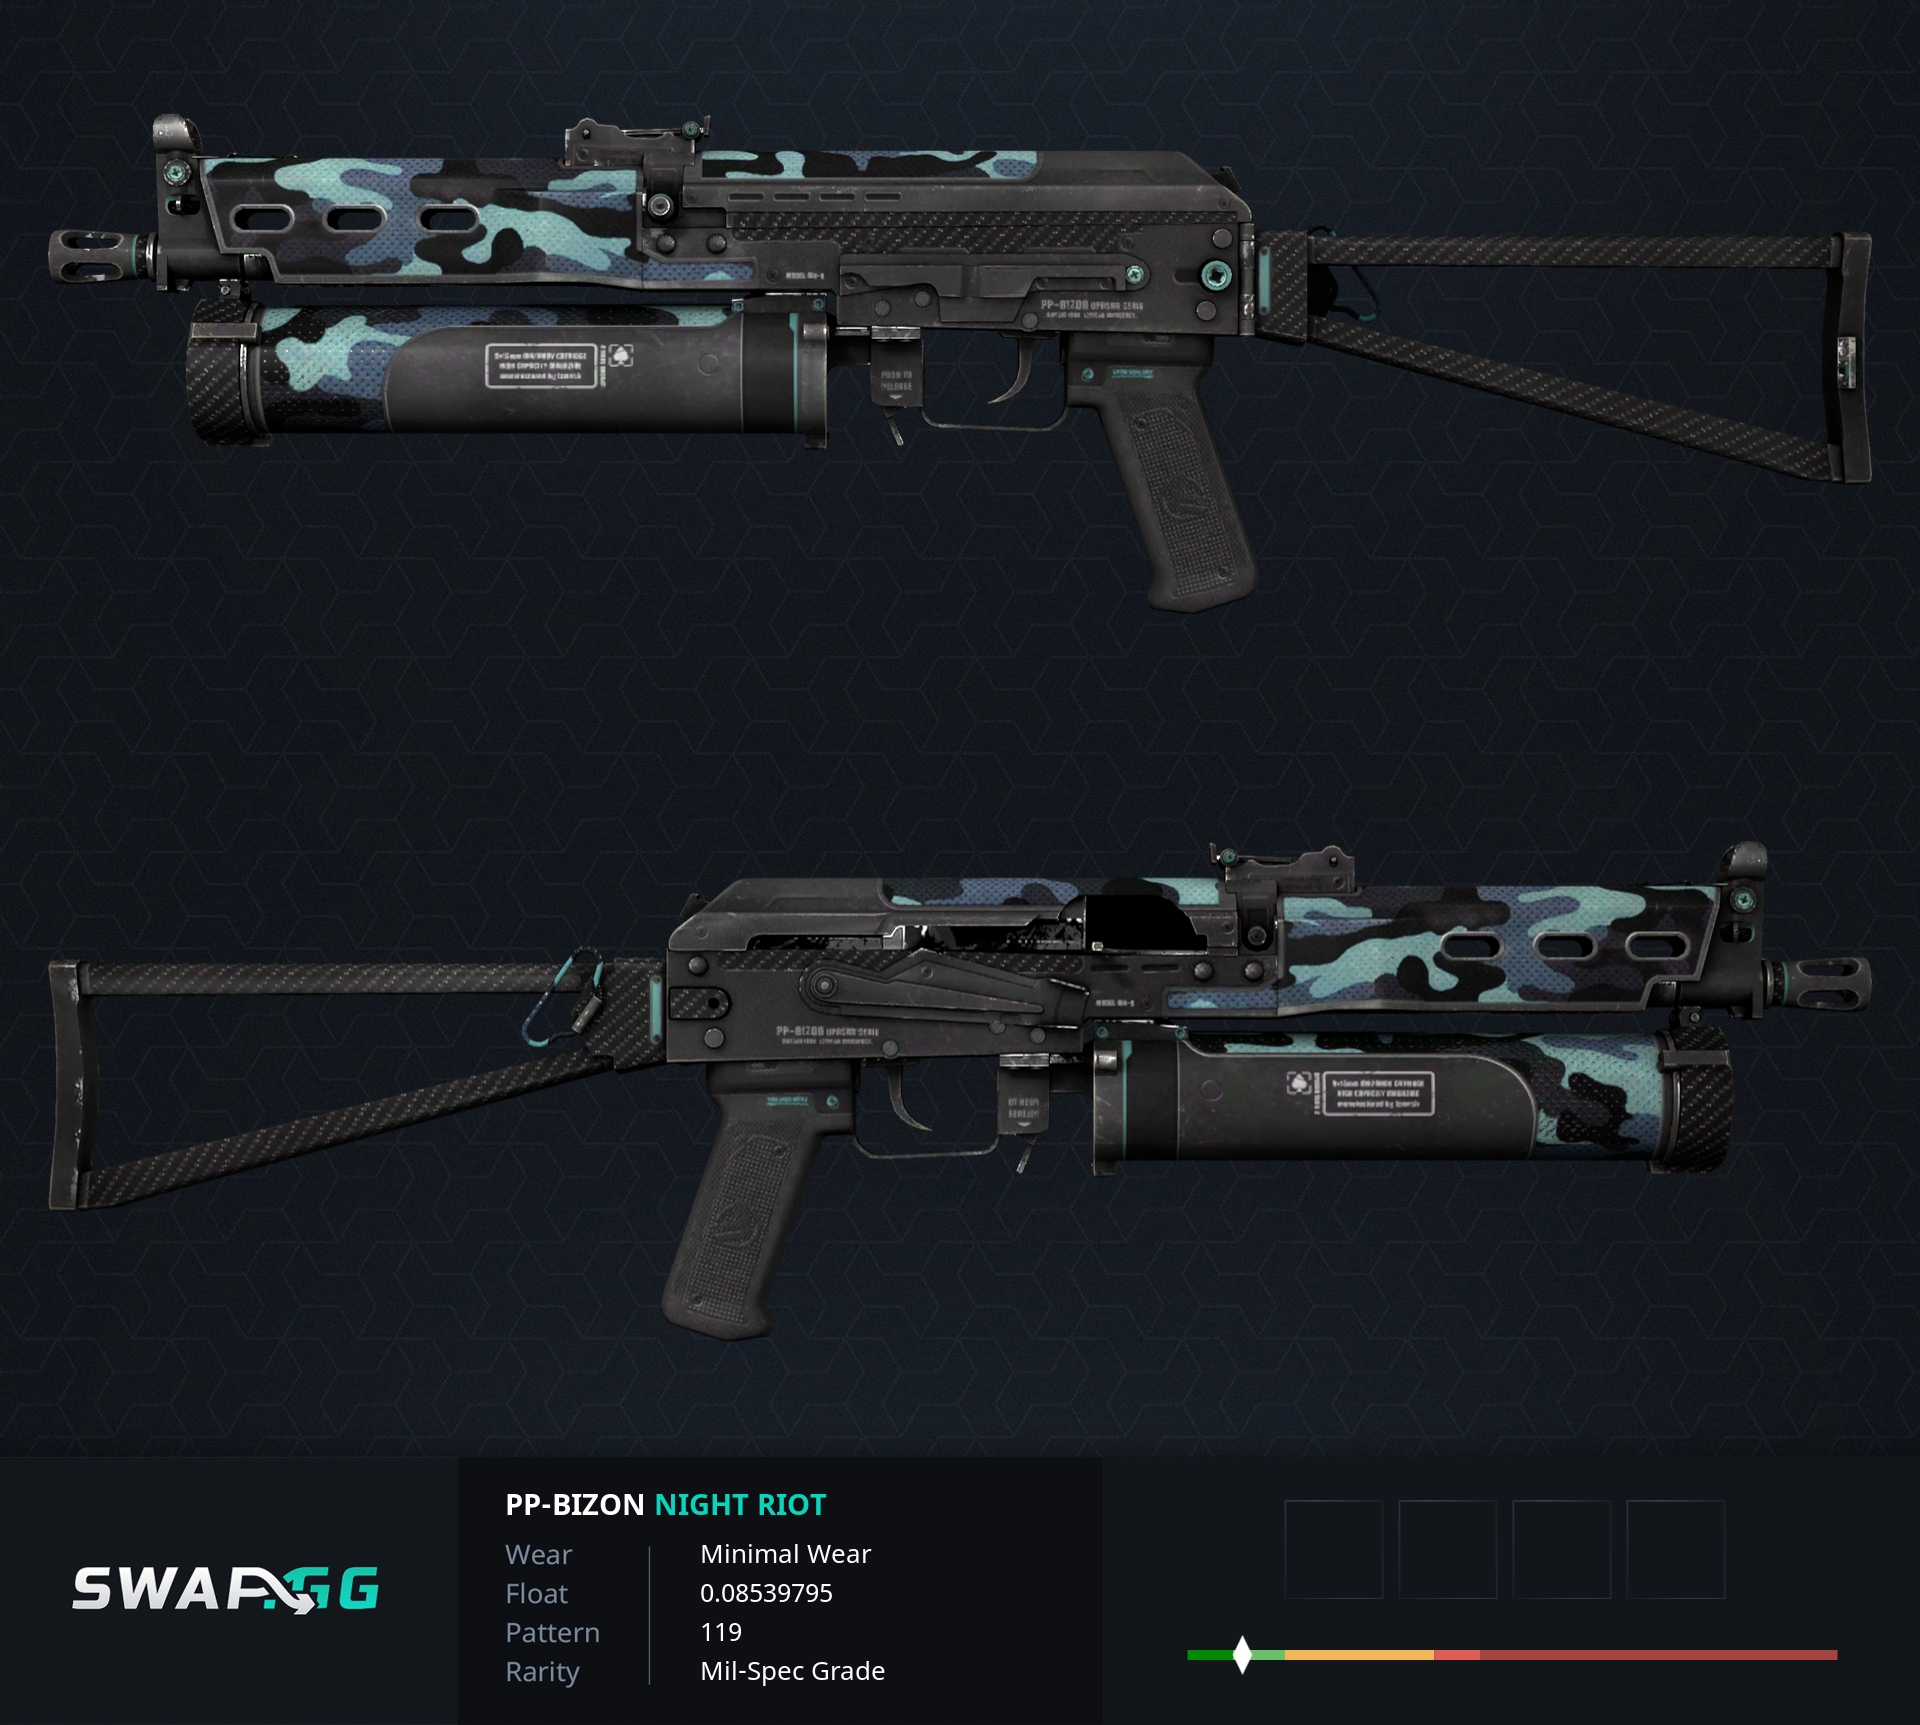 PP-Bizon Sand Dashed cs go skin download the new for ios